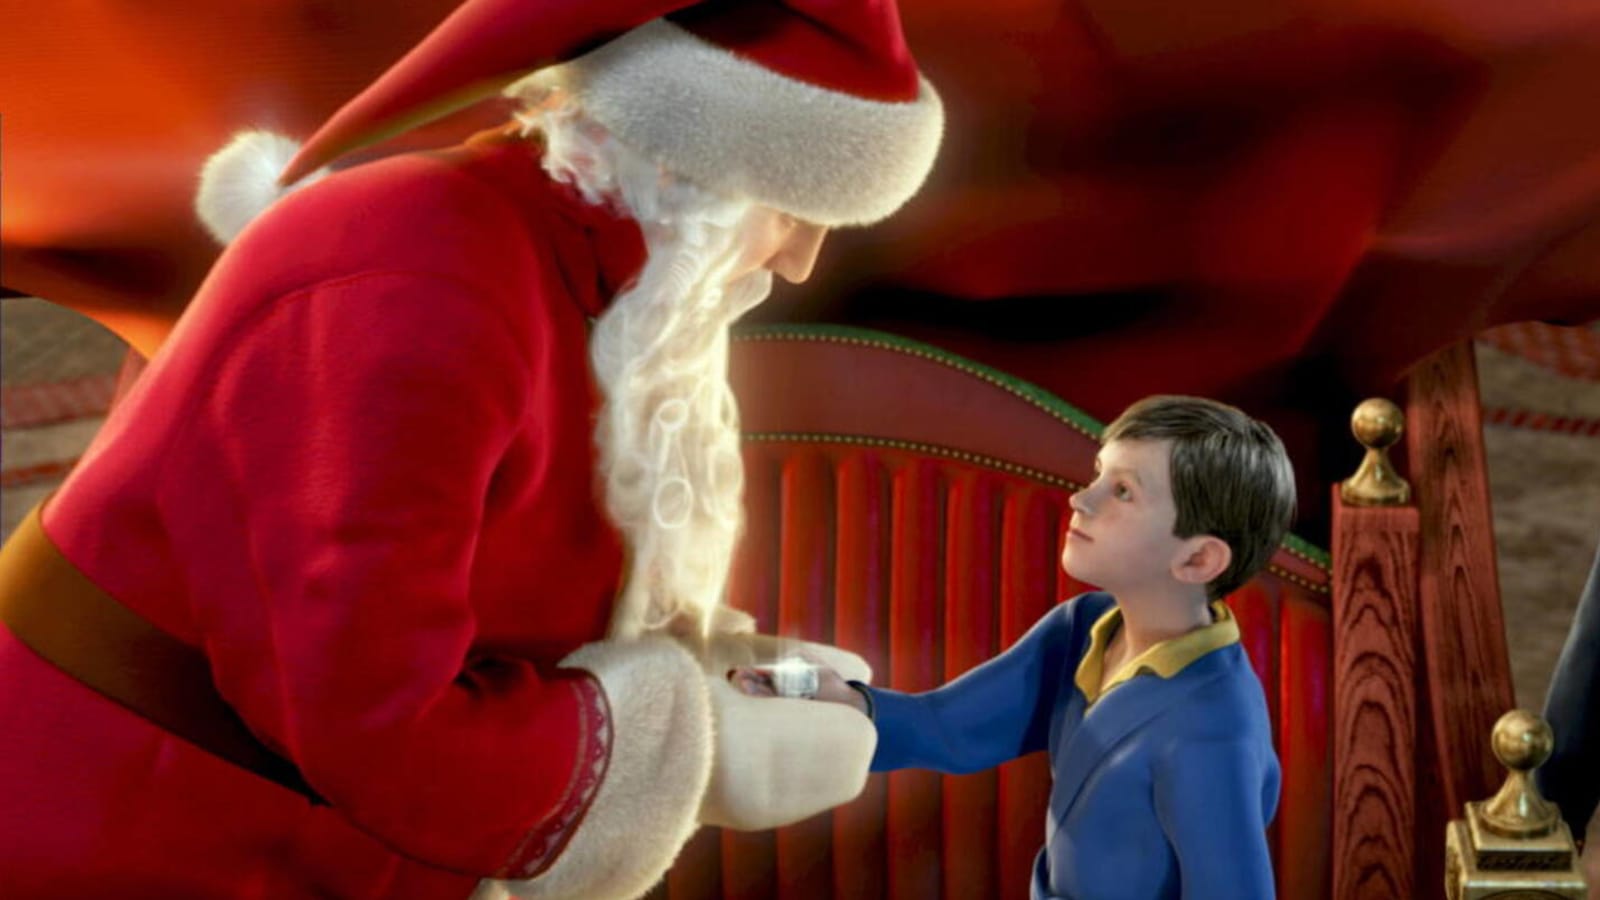 20 facts you might not know about 'The Polar Express'